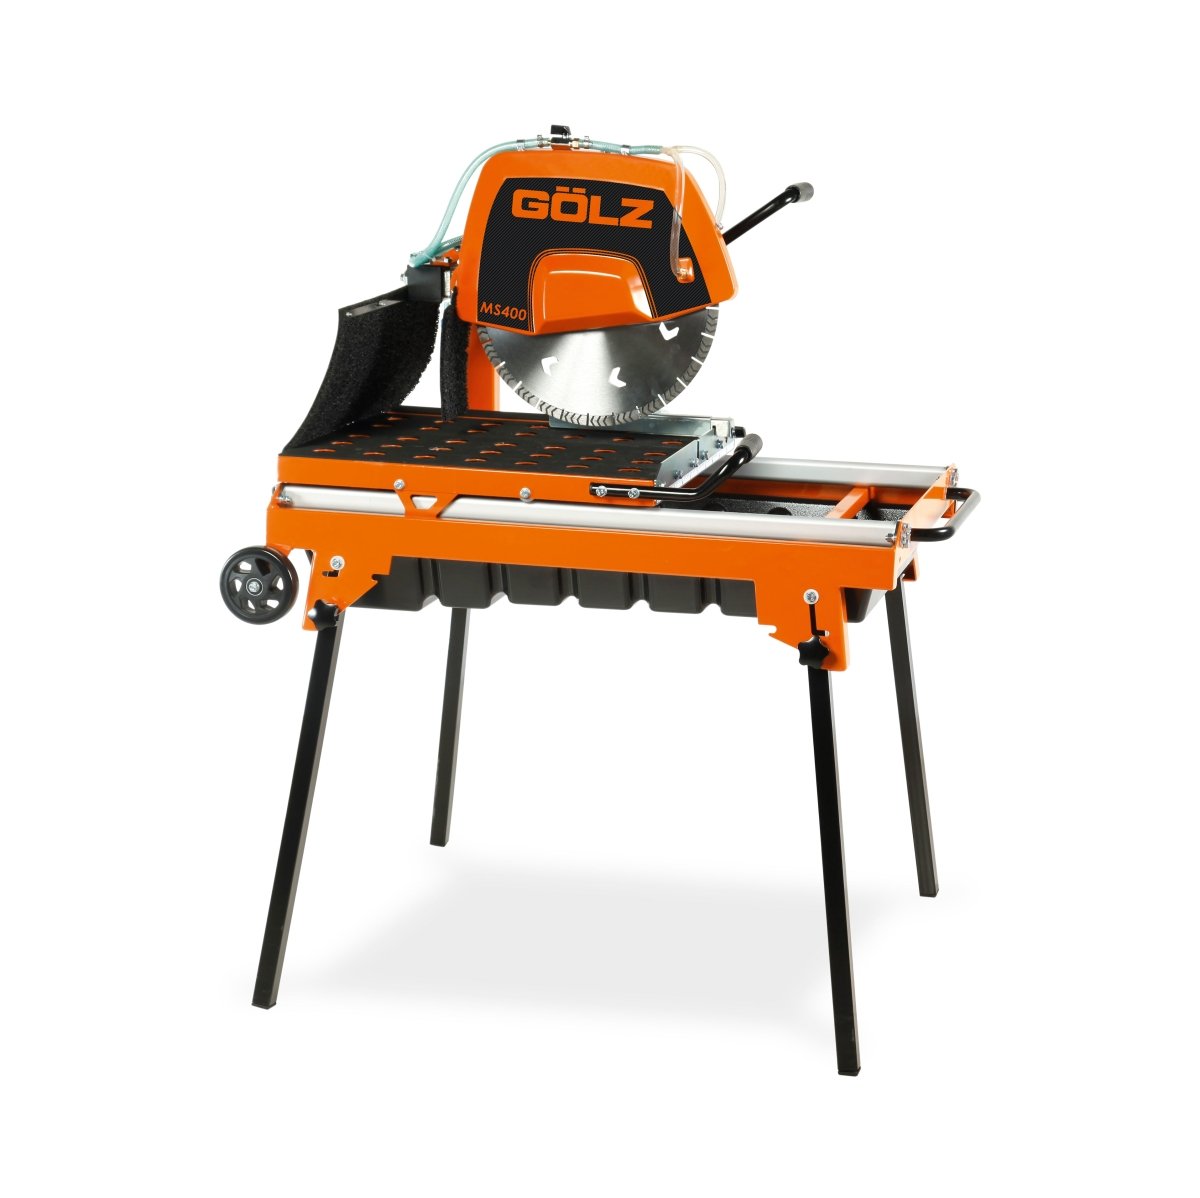 GOLZ MS400 Table Saw